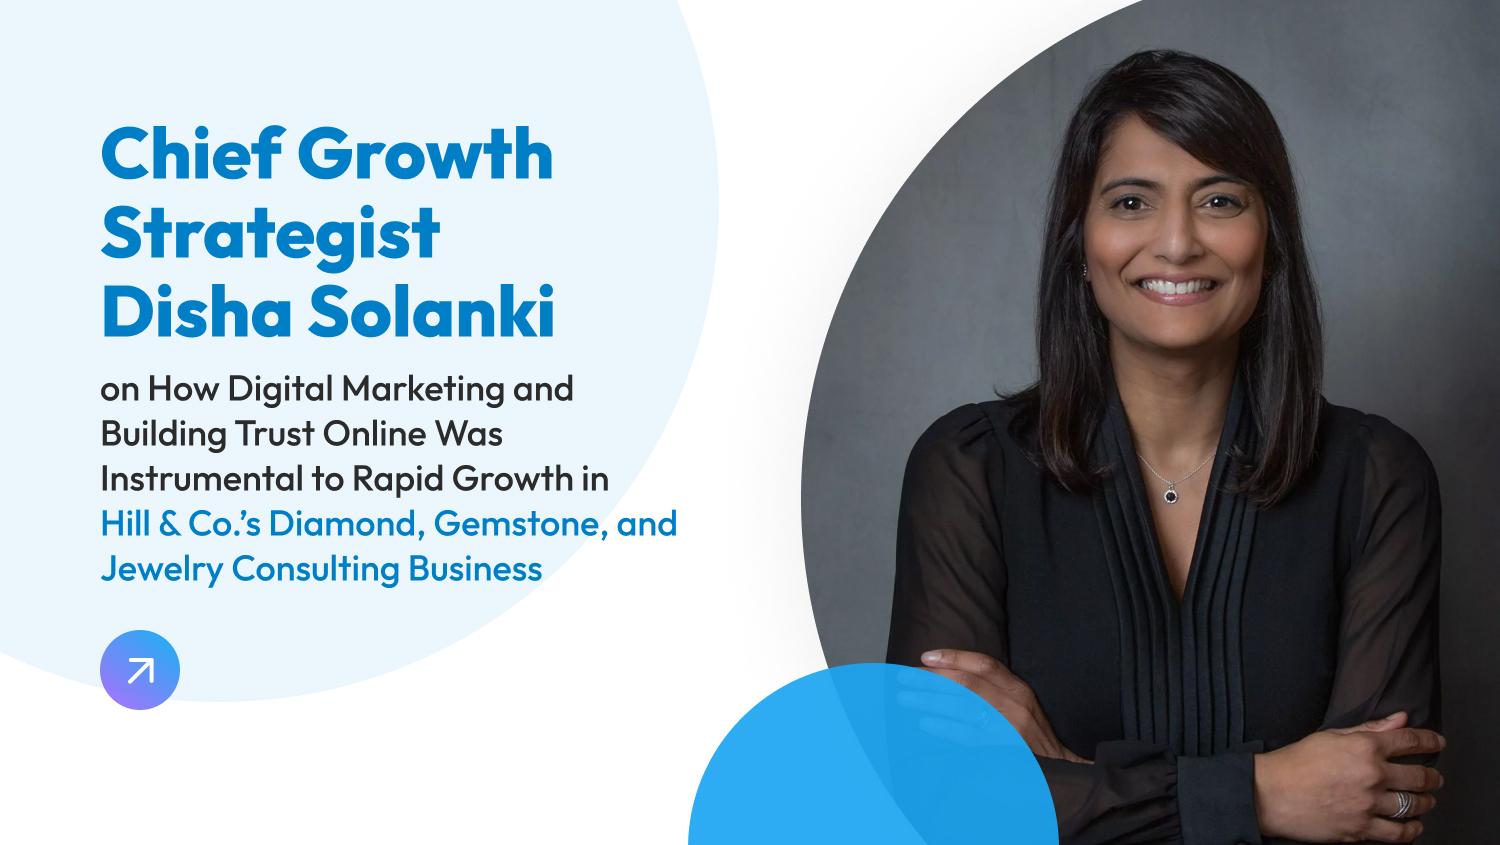 Chief Growth Strategist Disha Solanki on How Digital Marketing and Building Trust Online Was Instrumental to Rapid Growth in Hill & Co.’s Diamond, Gemstone, and Jewelry Consulting Business